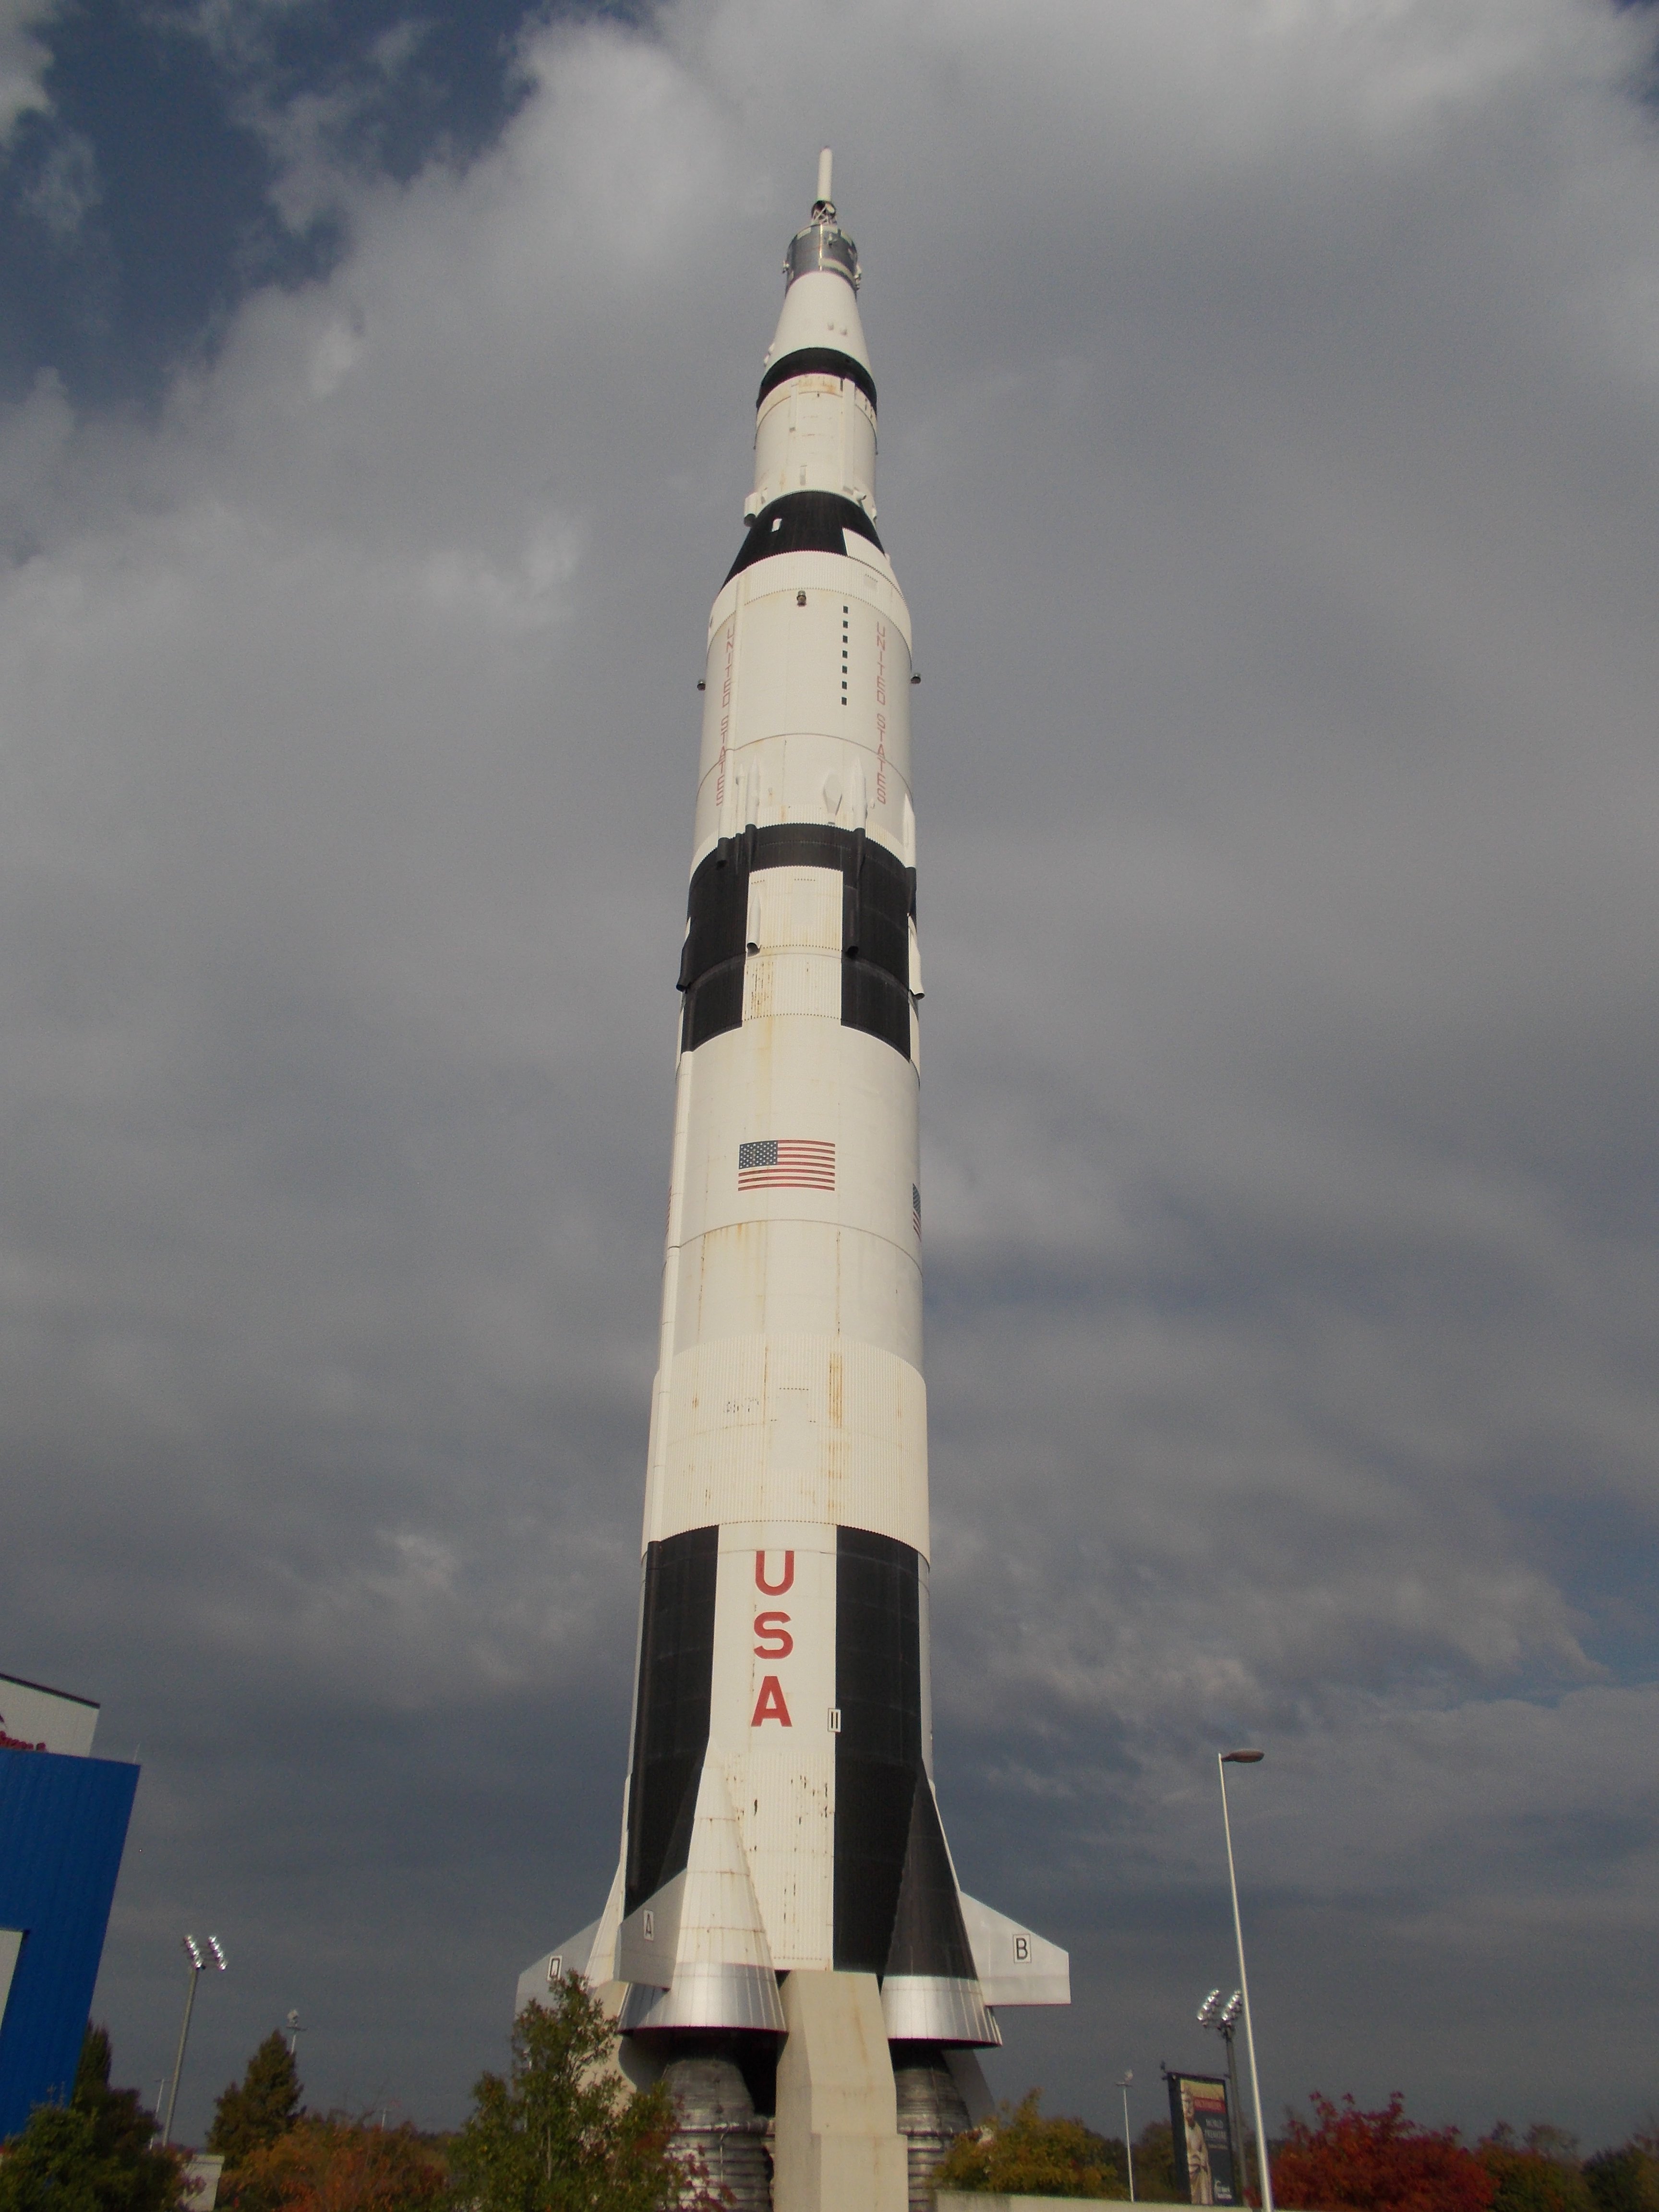 U.S. Space and Rocket Center - Things to do in Huntsville